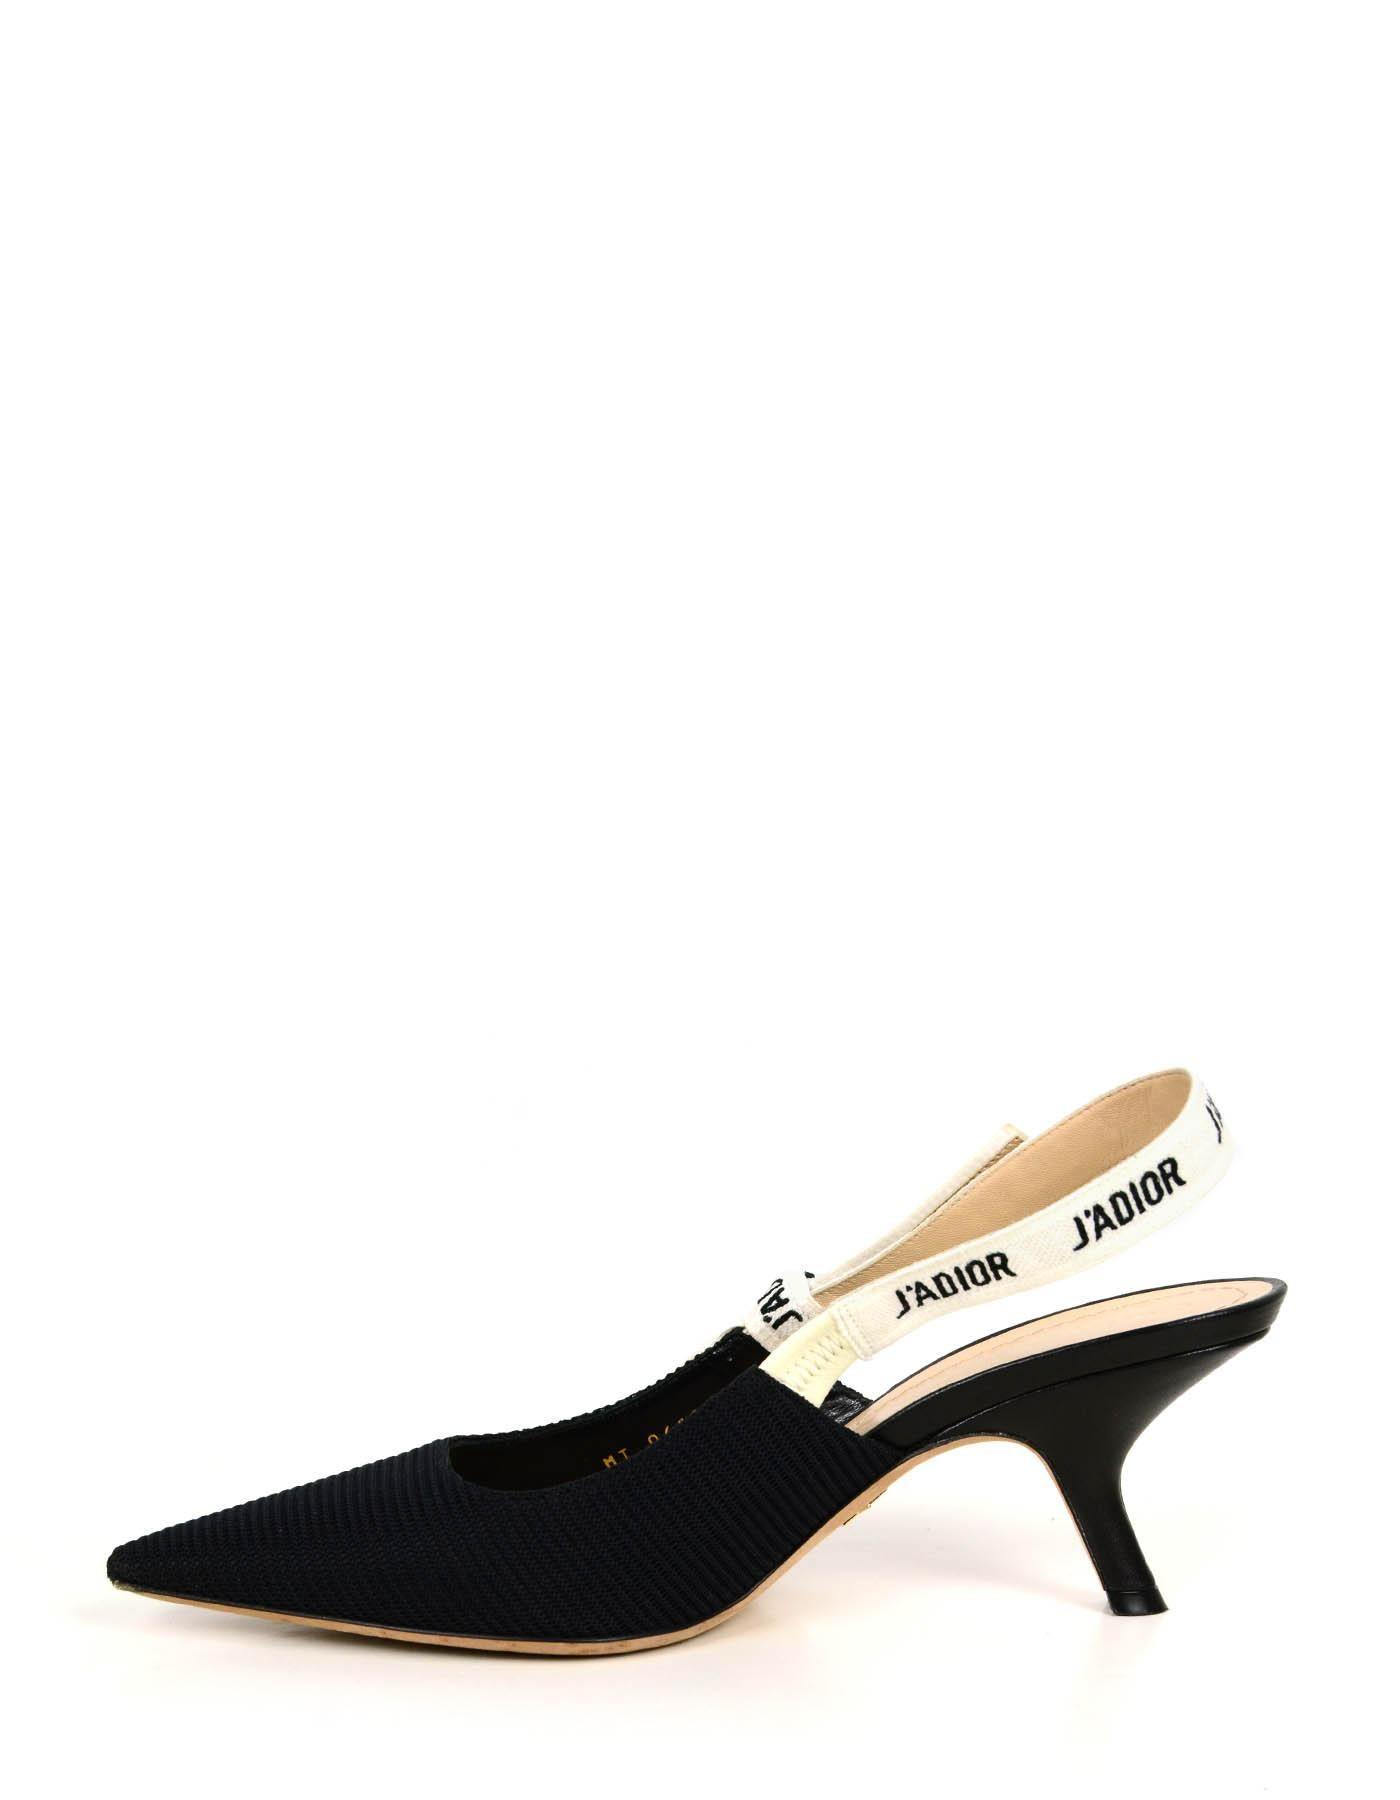 Christian Dior Black Technical Canvas Ribbon J’ADIOR Slingback Pumps

Made In: Italy
Color: Black
Materials:Technical canvas & ribbon
Closure/Opening: Slingback
Overall Condition: Very good/excellent. Wear to bottom tips
Estimated